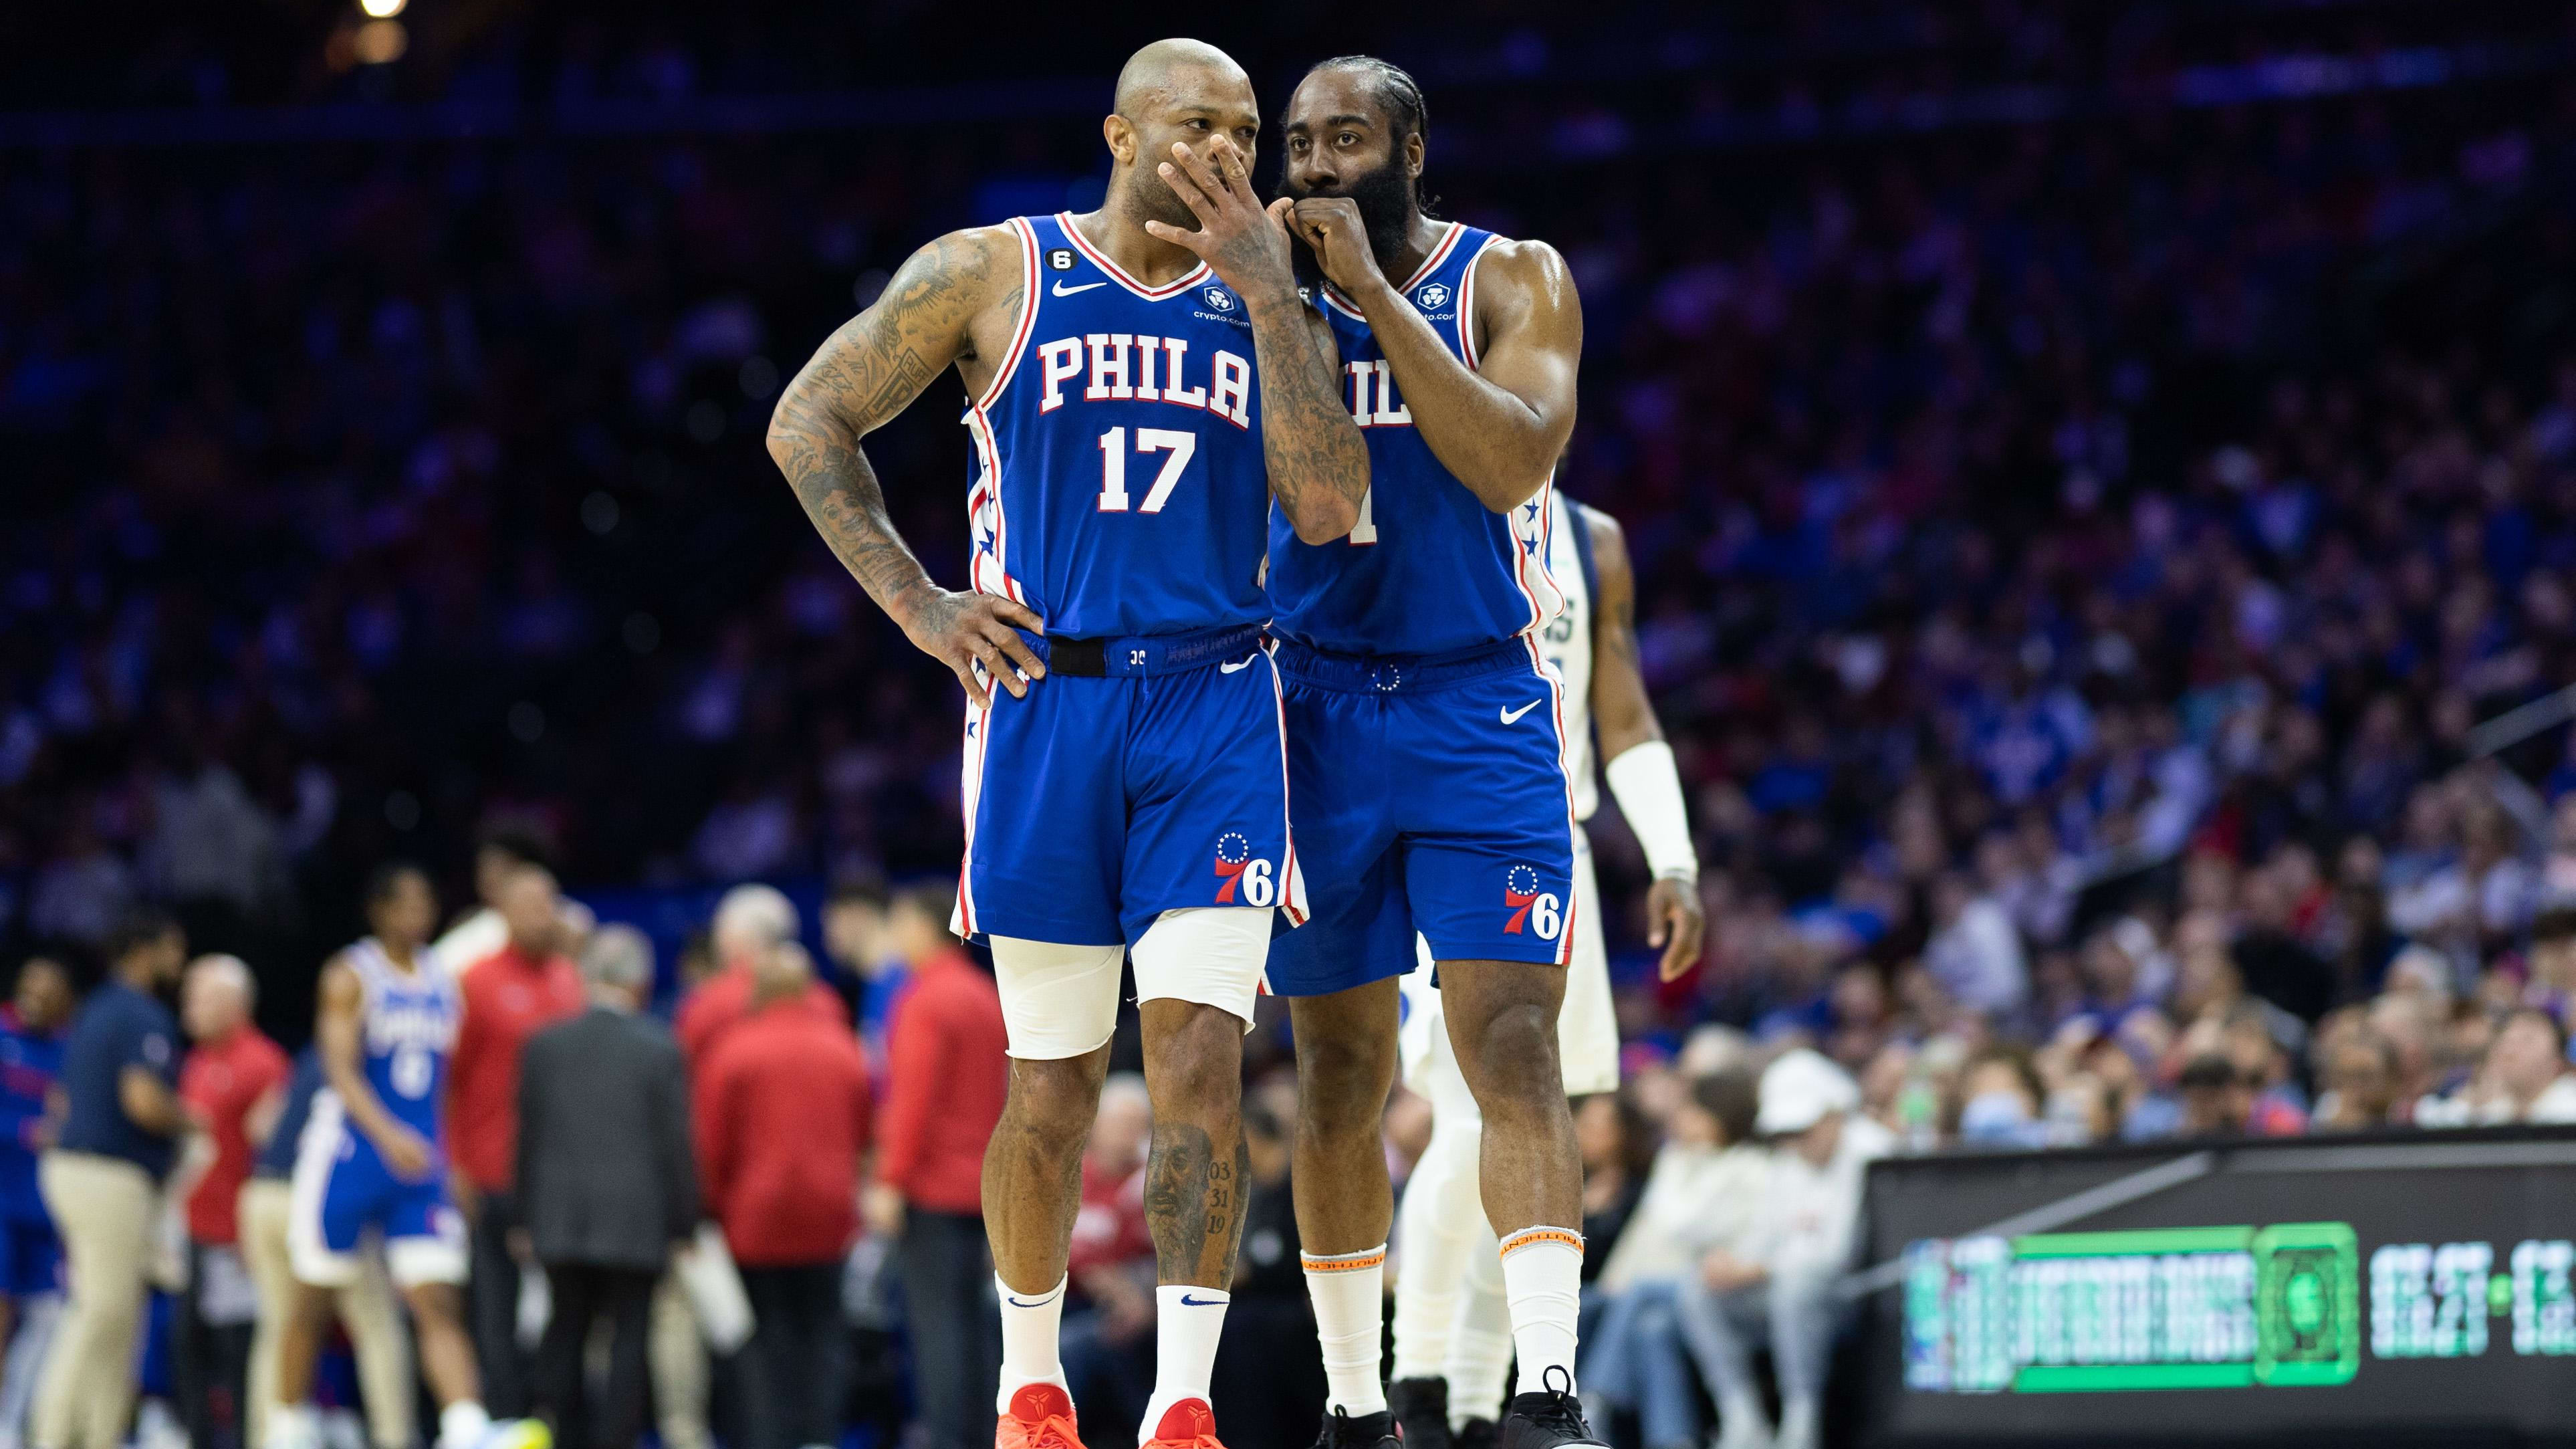 PJ Tucker Poised to Continue Impact with LA Clippers Next Season